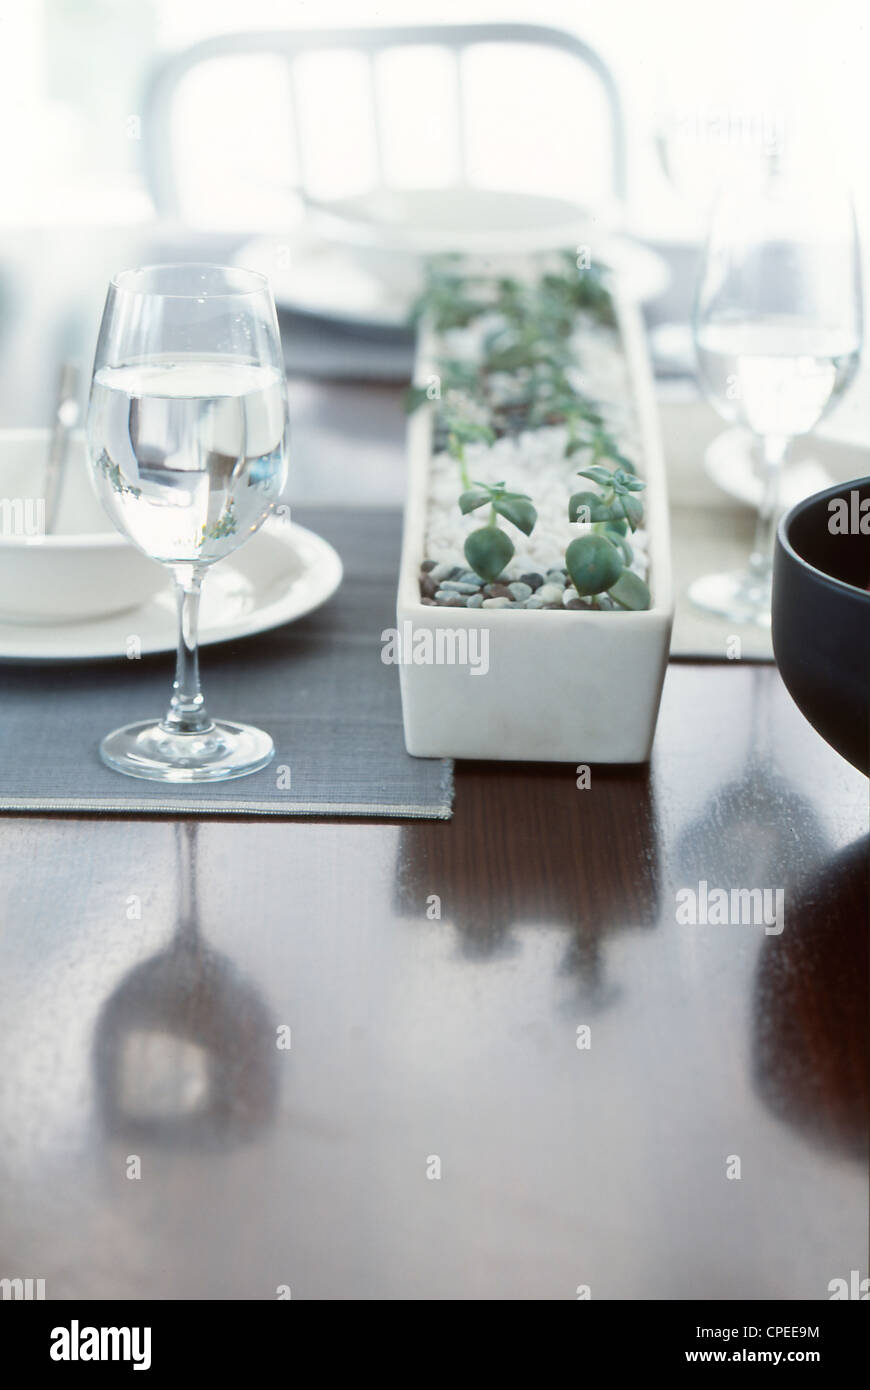 Plant Pot And Dishware On Dining Table Stock Photo